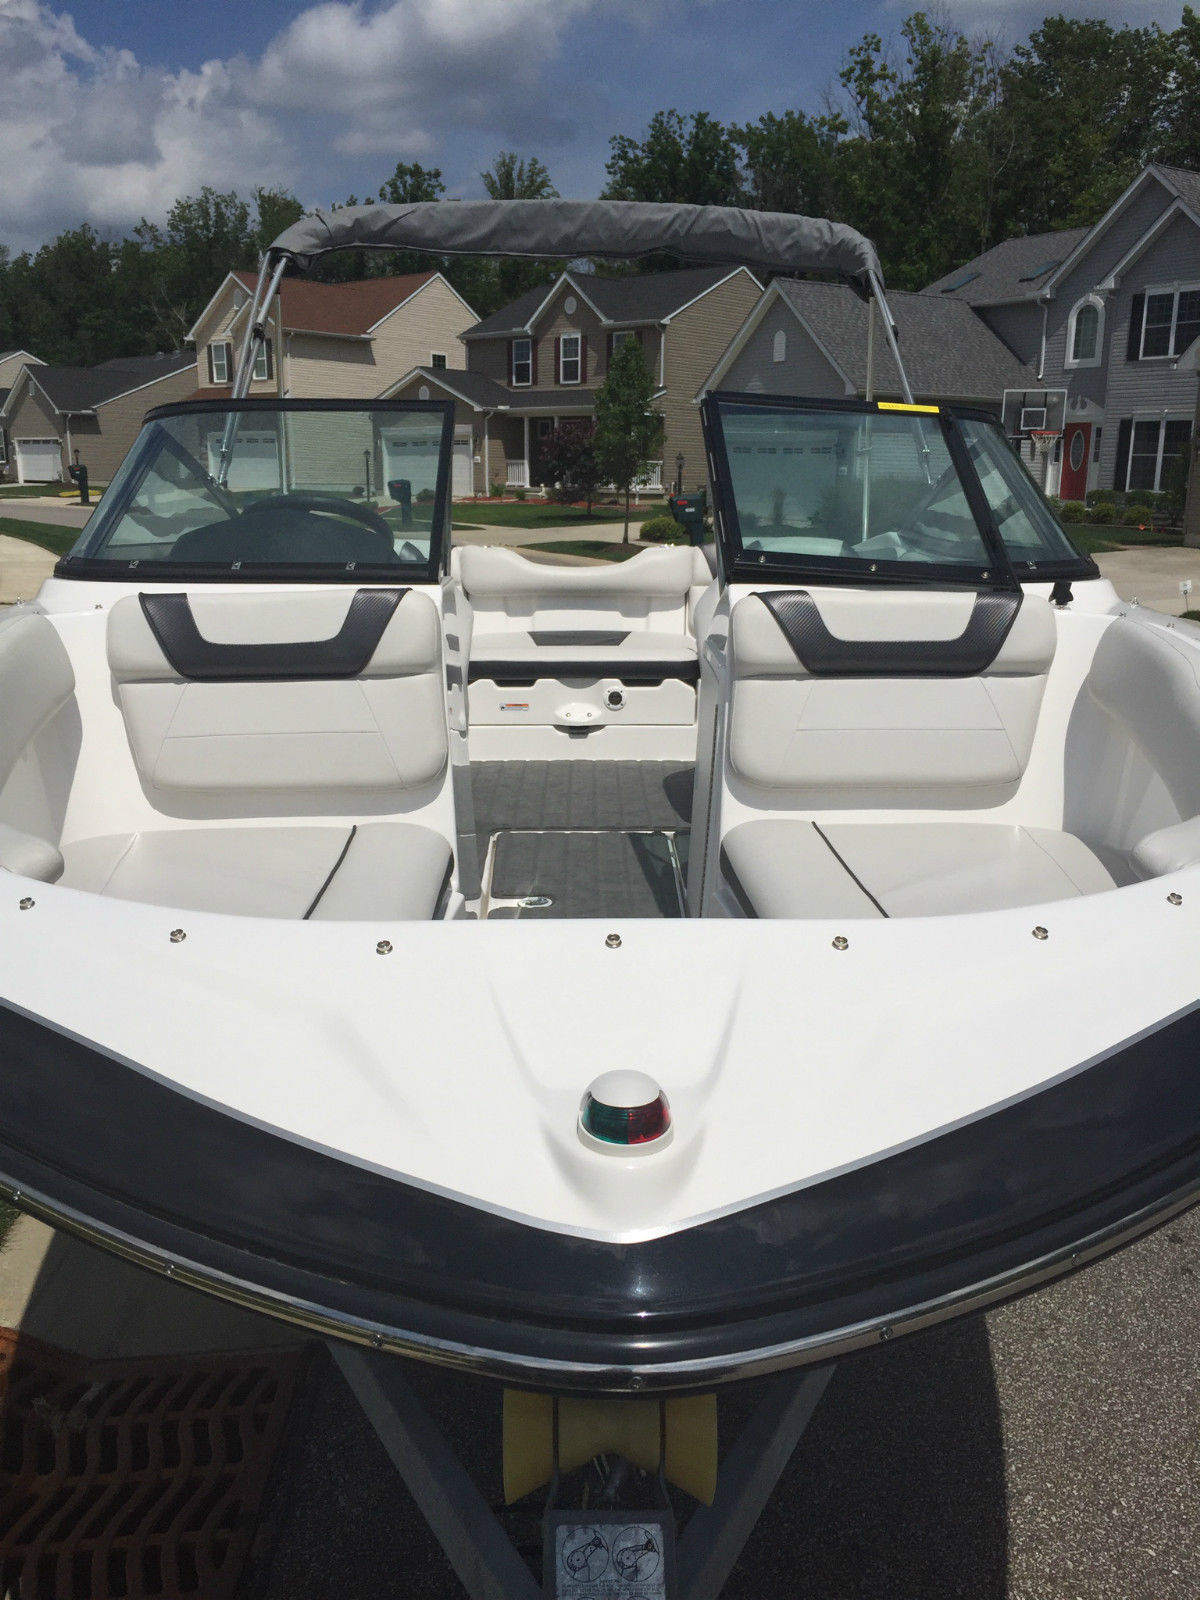 Yamaha SX192 2014 for sale for $26,999 - Boats-from-USA.com